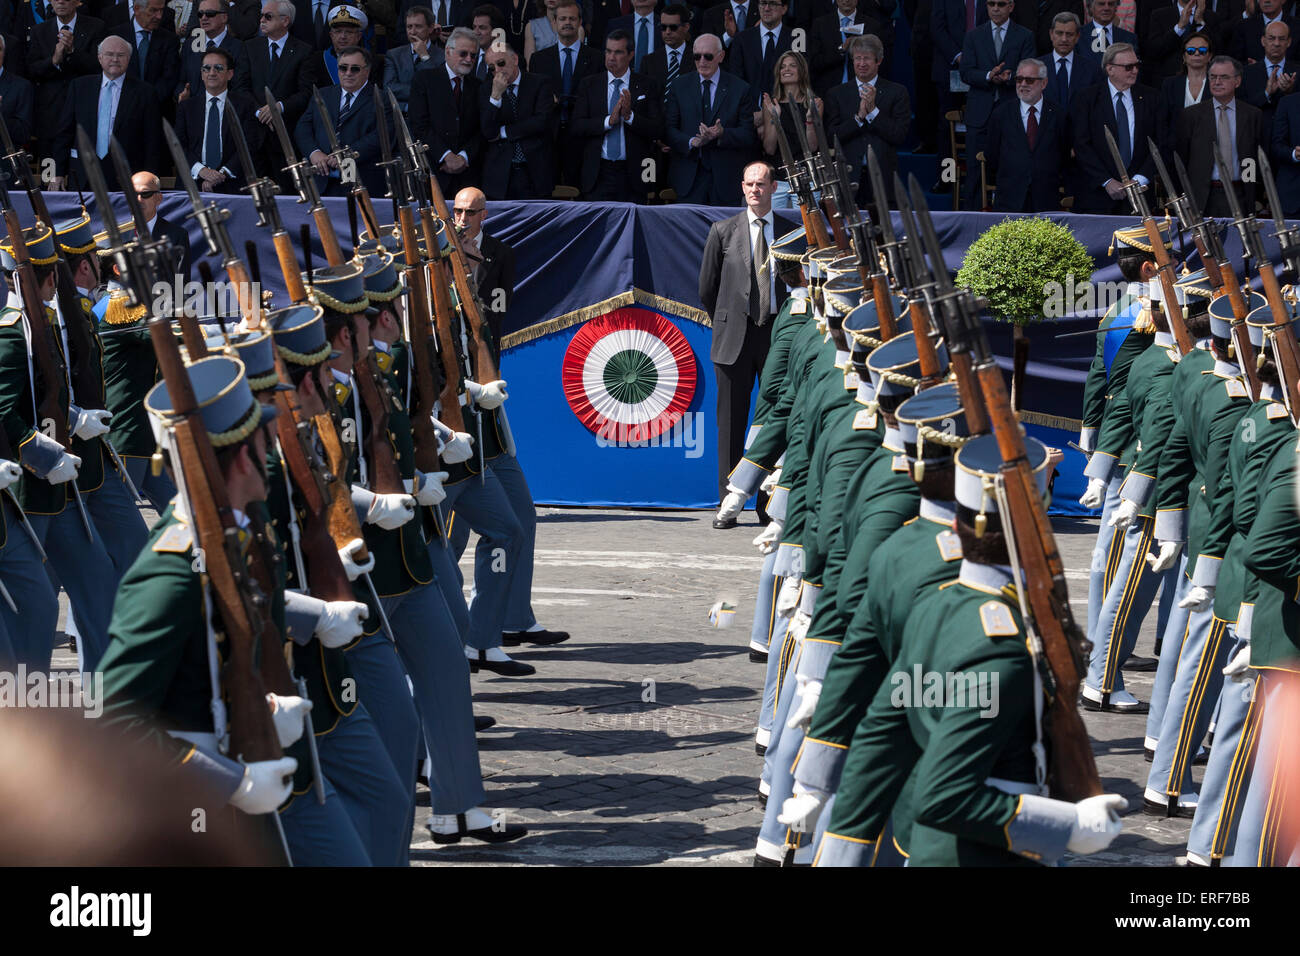 Rome, Italy. 2nd June, 2015. Military parade and flypast for the 69th Anniversary of the Italian Republic, Foro Imperiali. Financial Guard march past the podium. Rome, Italy. 6/2/15 Credit:  Stephen Bisgrove/Alamy Live News Stock Photo